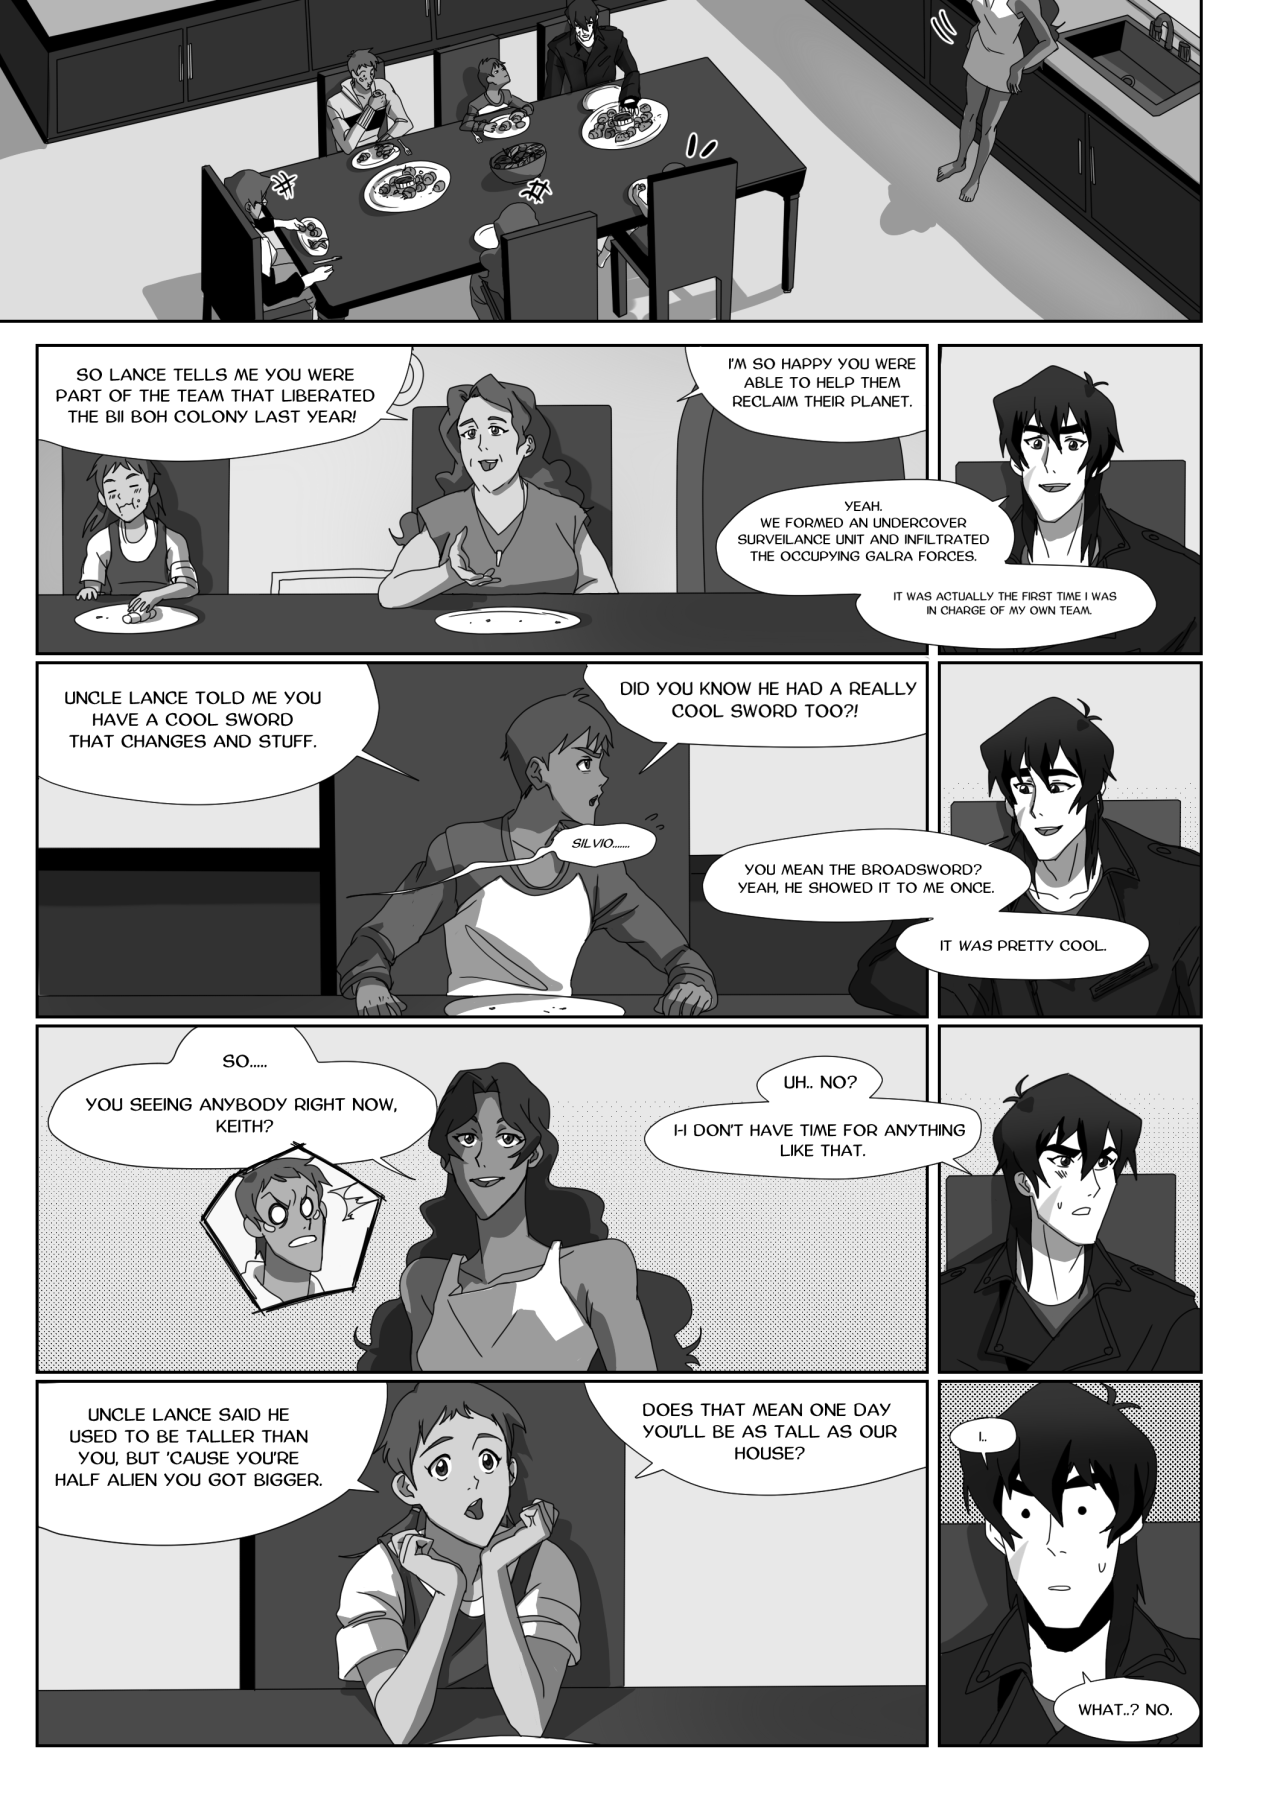 Previous. klance comic SRPA page 16! lances family grills keith and rachel ...